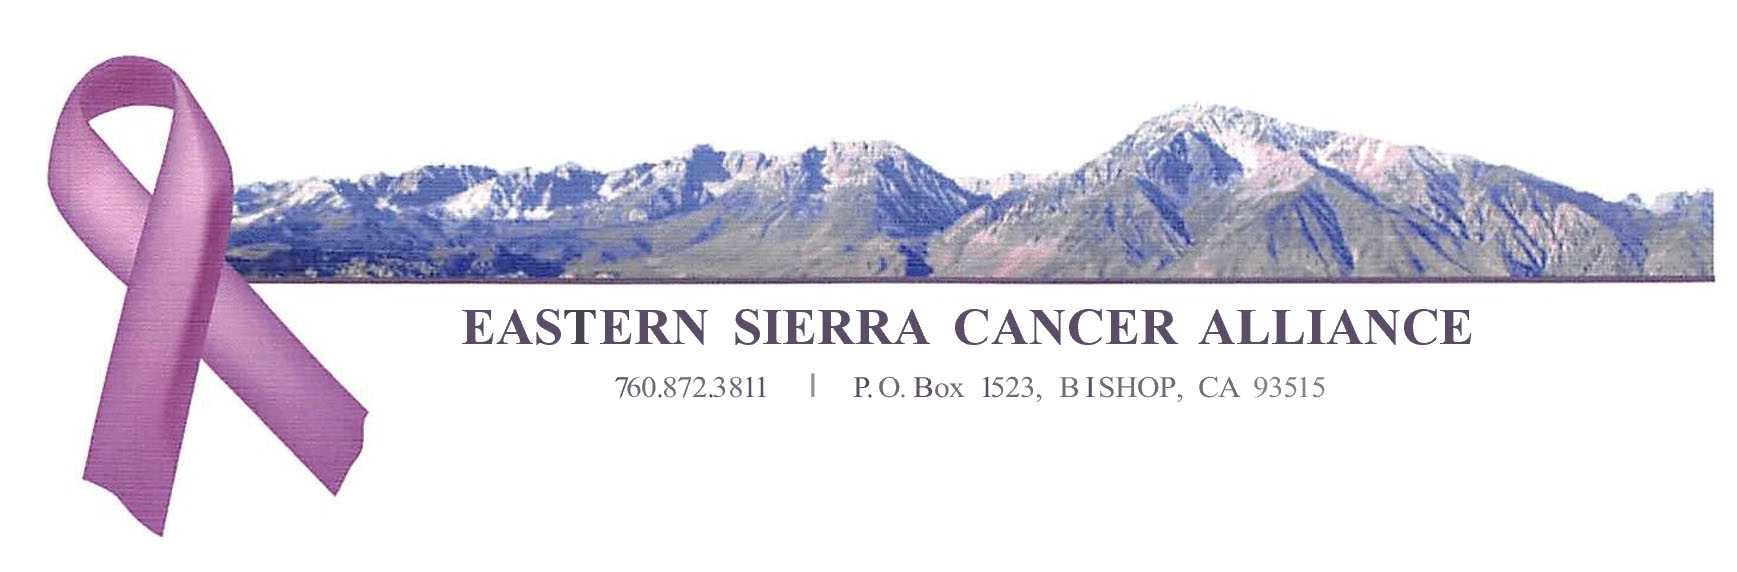 Eastern Sierra Cancer Alliance – CARE • SUPPORT • EDUCATION